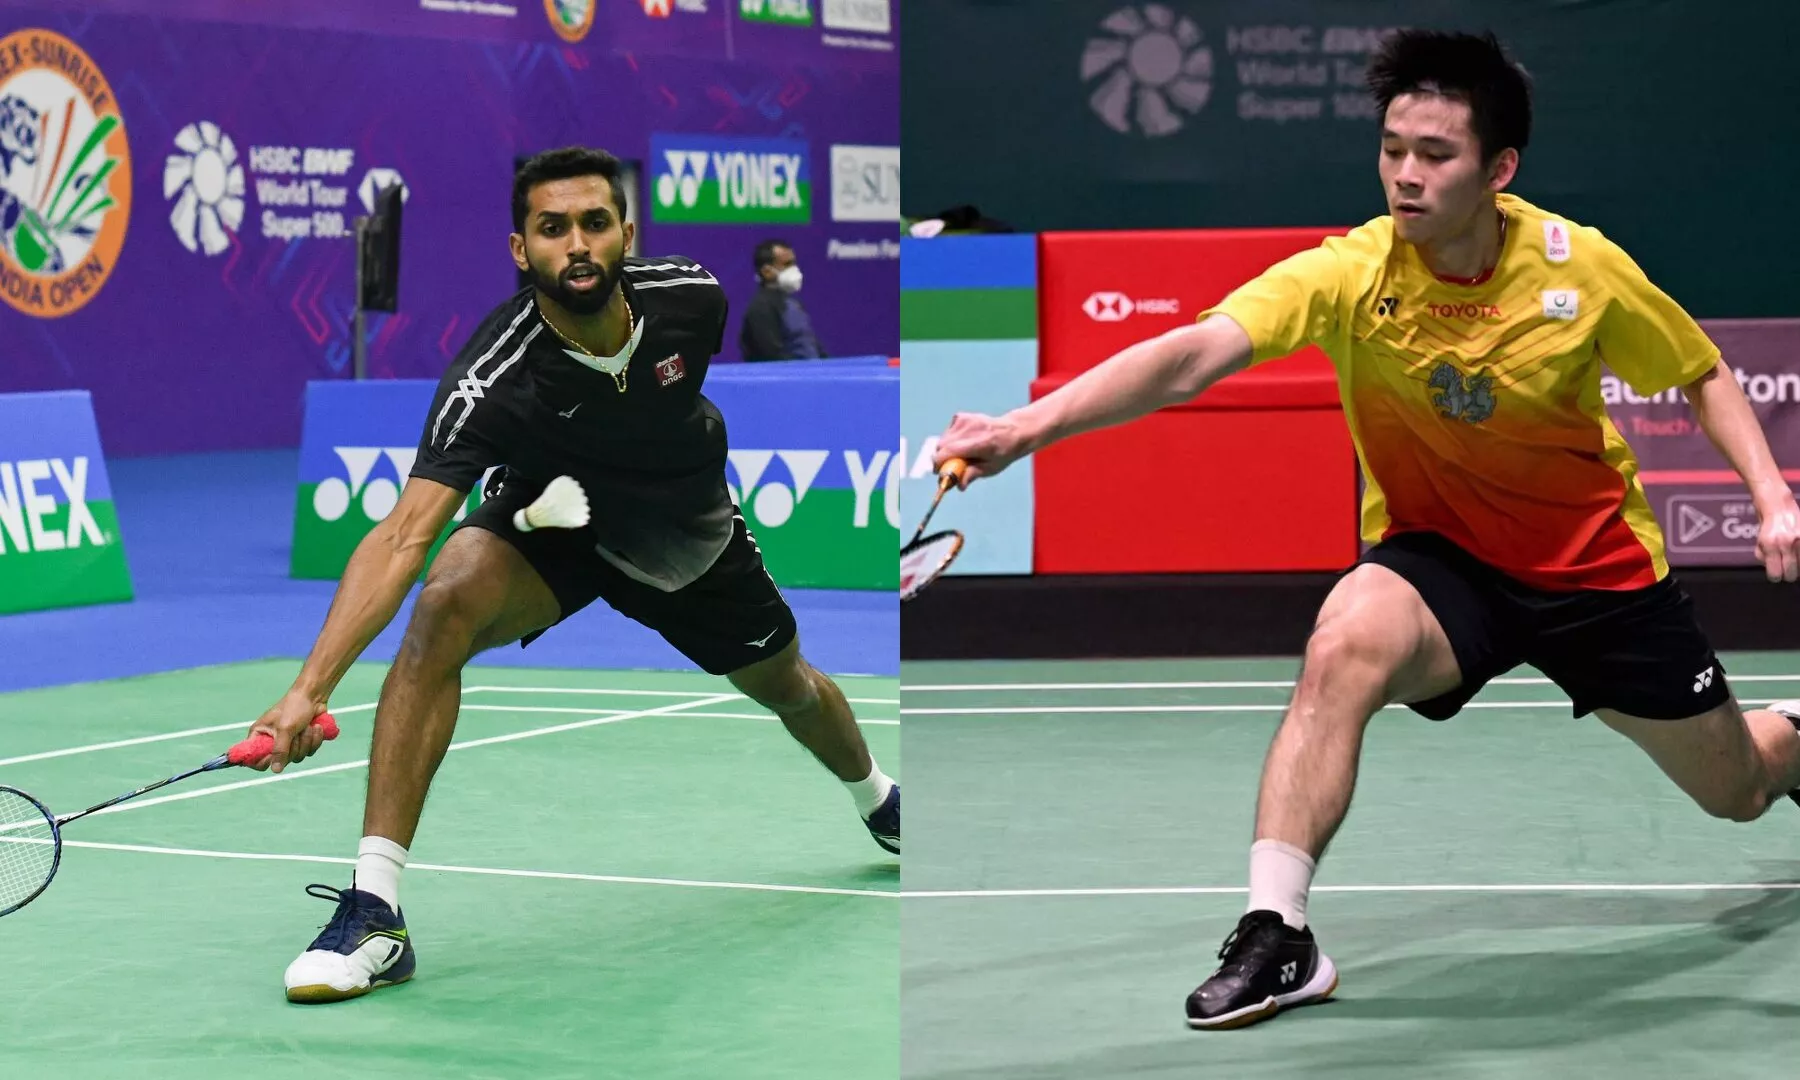 Where and how to watch HS Prannoy vs Kunlavut Vitidsaran mens singles semifinal match in BWF World Championships 2023 live in India?